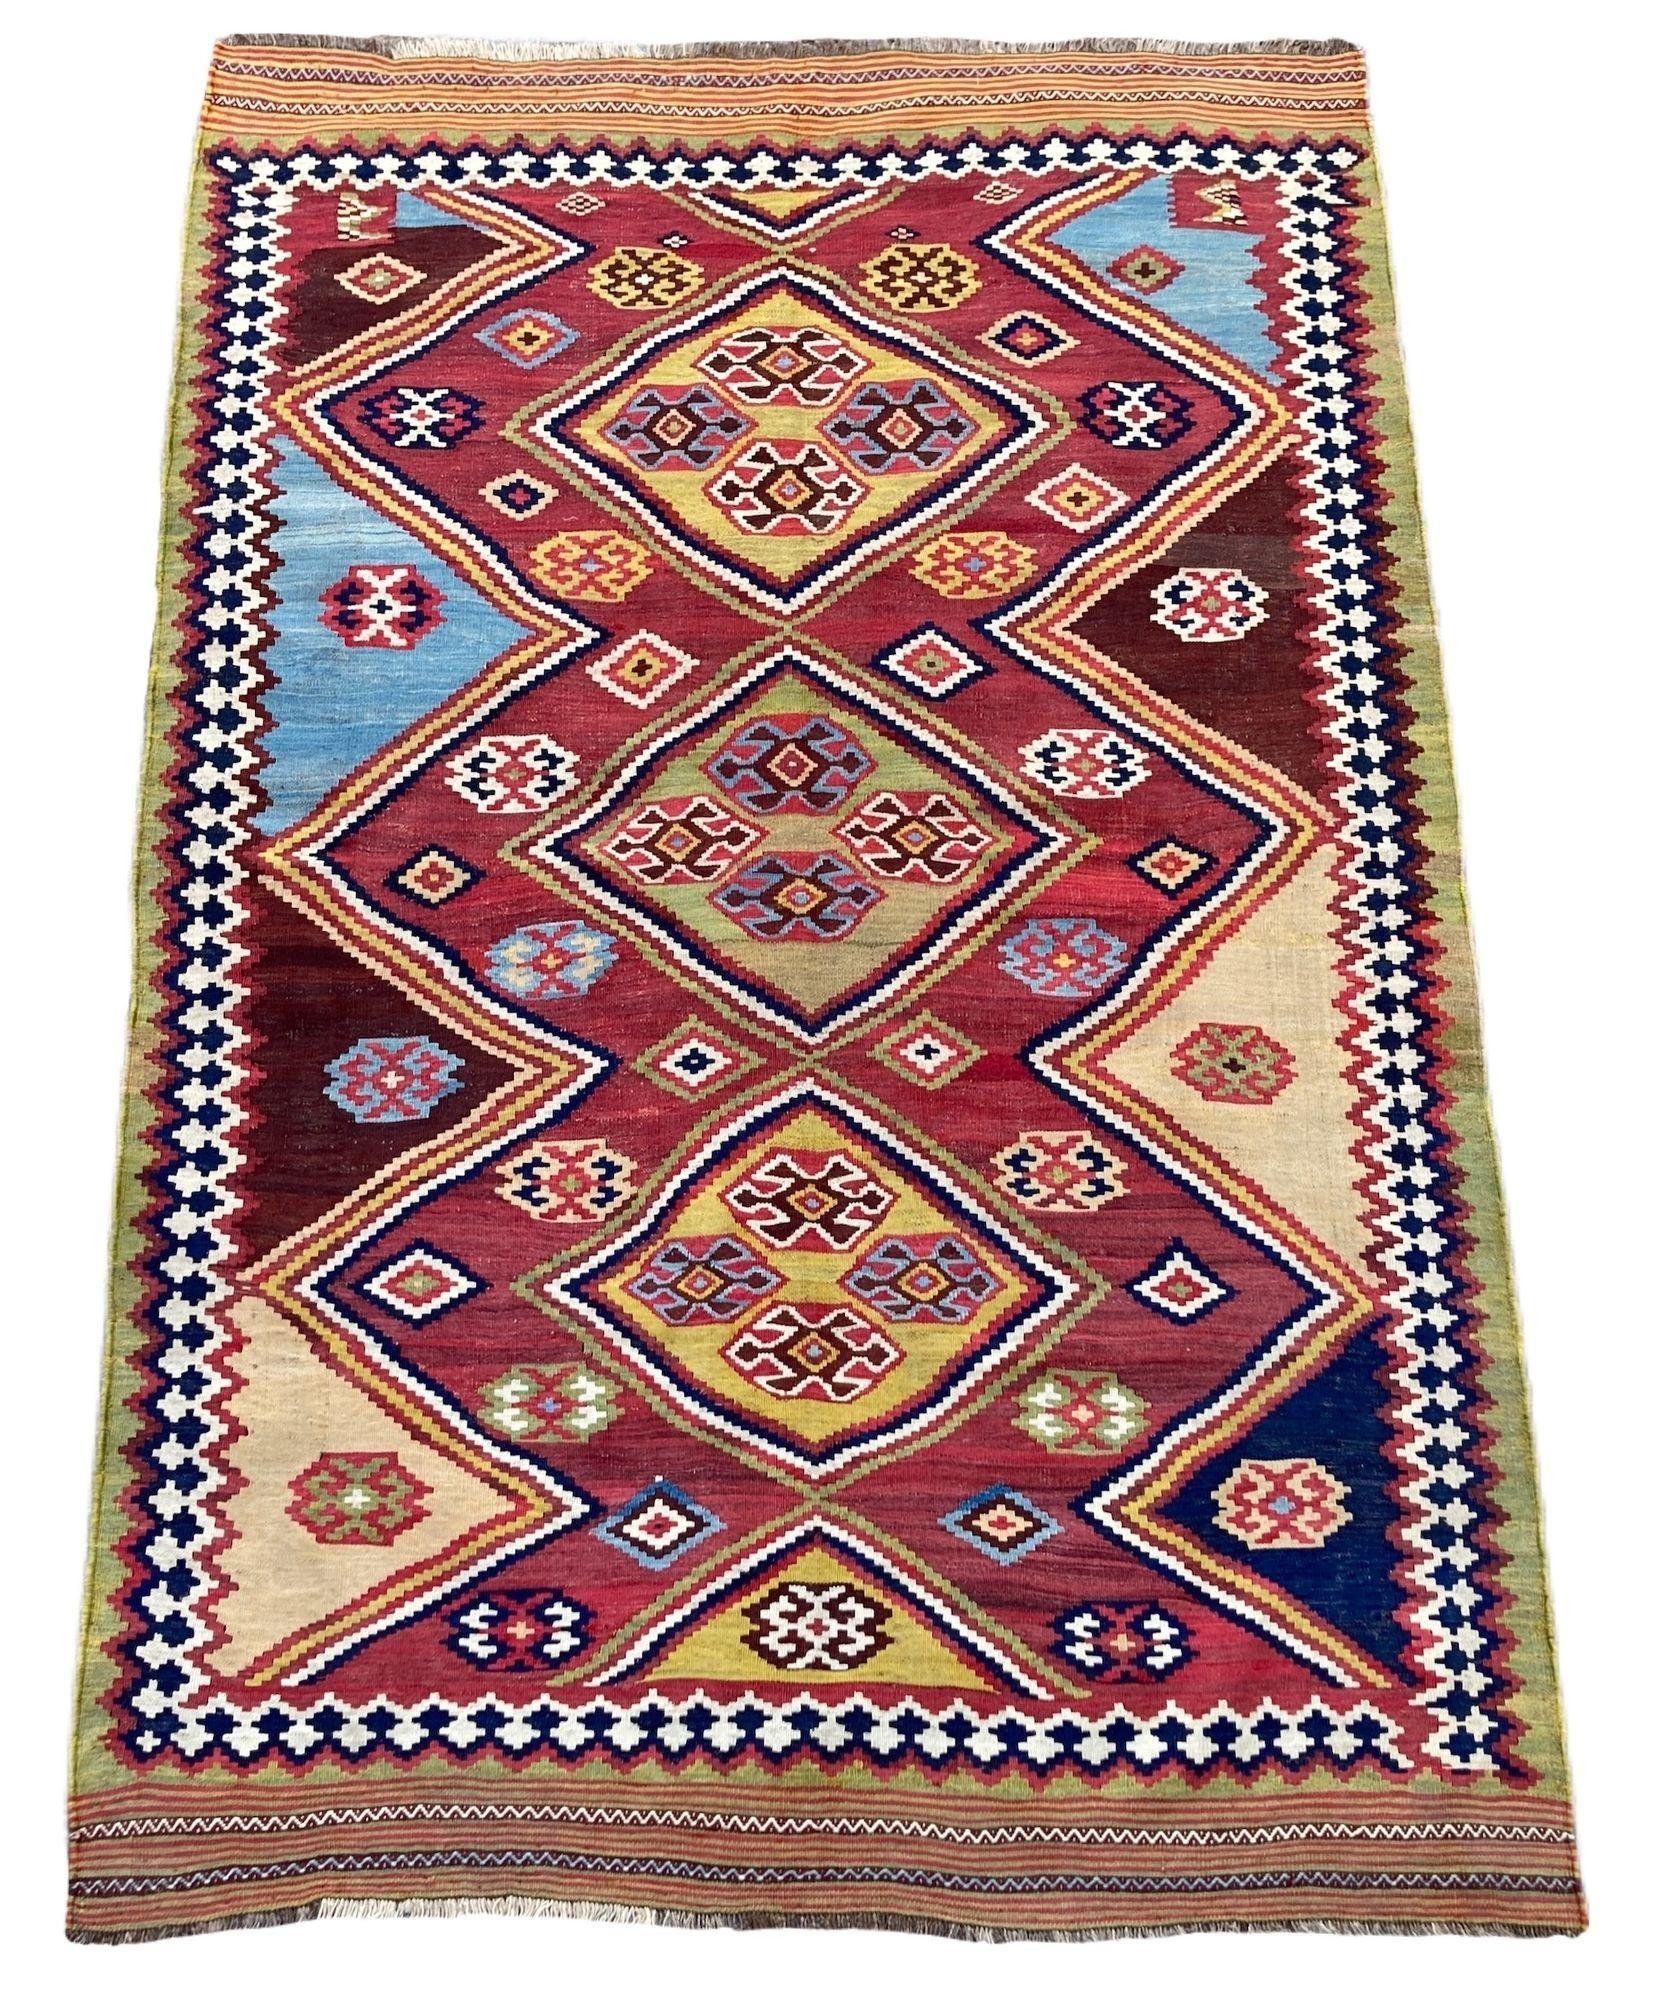 An outstanding antique Qashqai Kilim, handwoven by the eponymous nomadic tribe circa 1890 with a geometrical 3 medallion design on a terracotta field. An unusually small size with fabulous natural colours and a highly collectible piece.

Size: